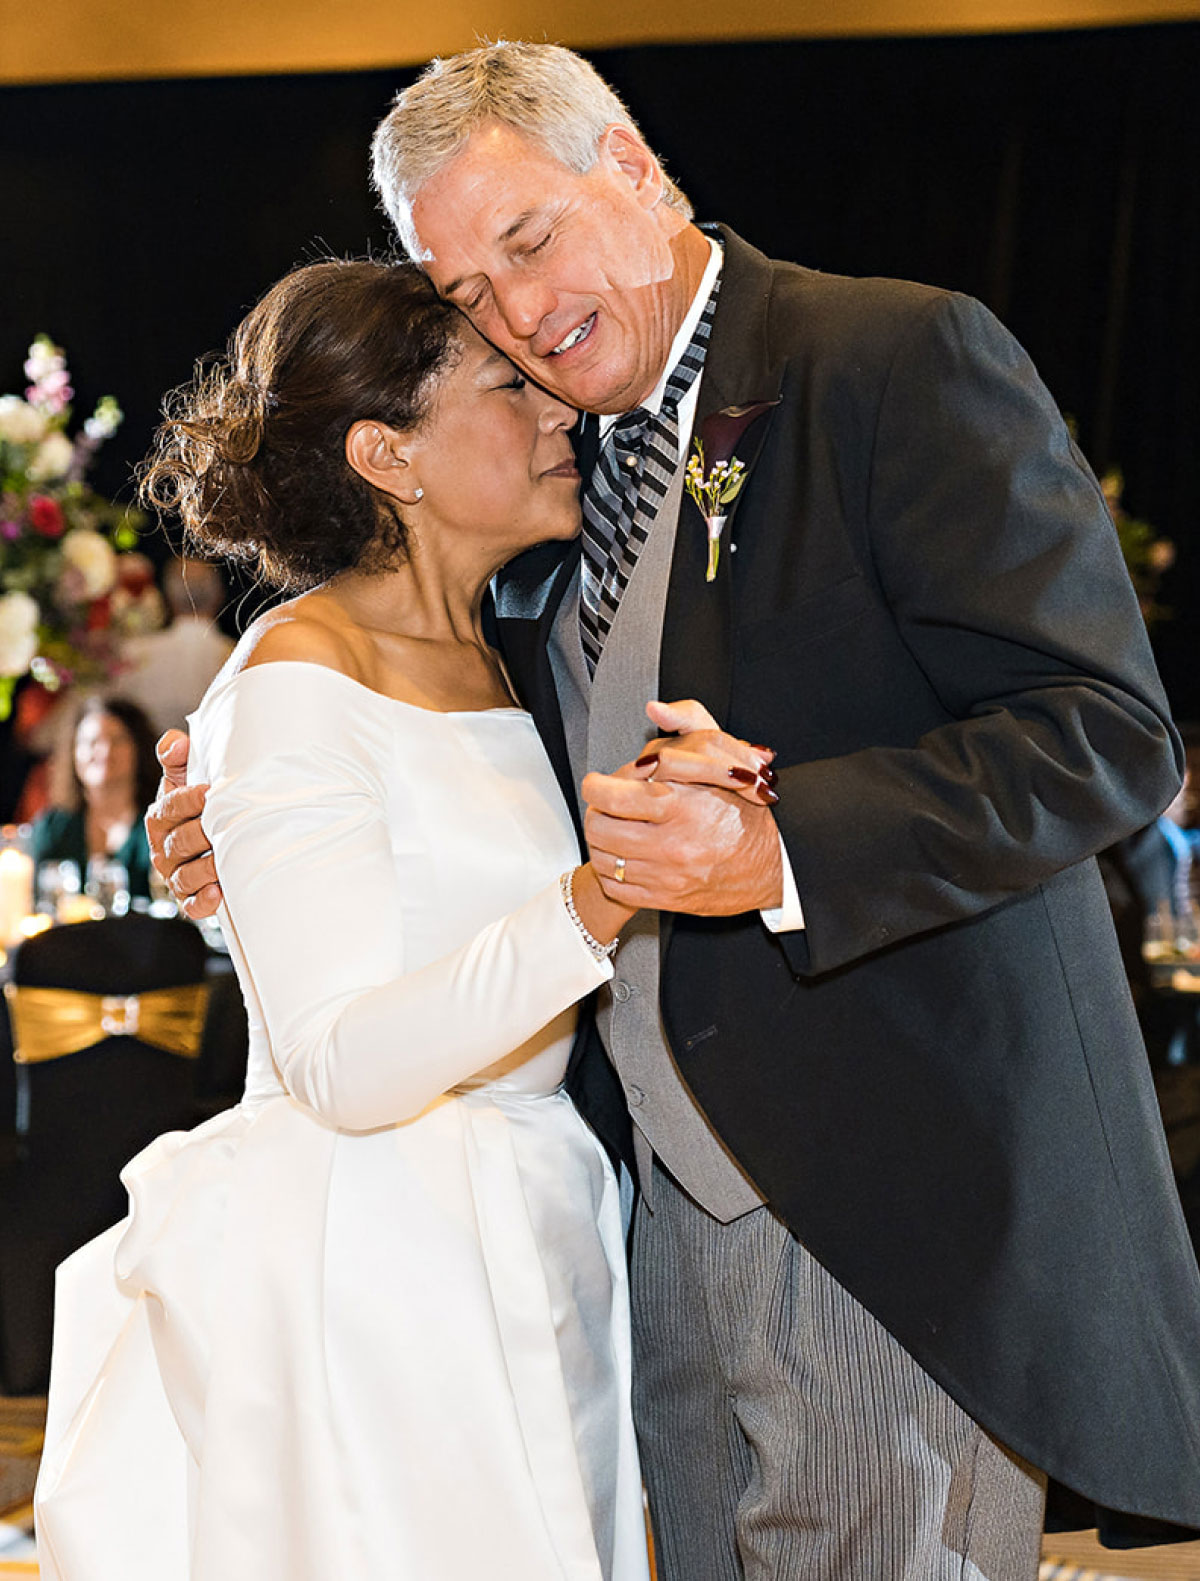 A middle-aged couple celebrating their milestone wedding day.